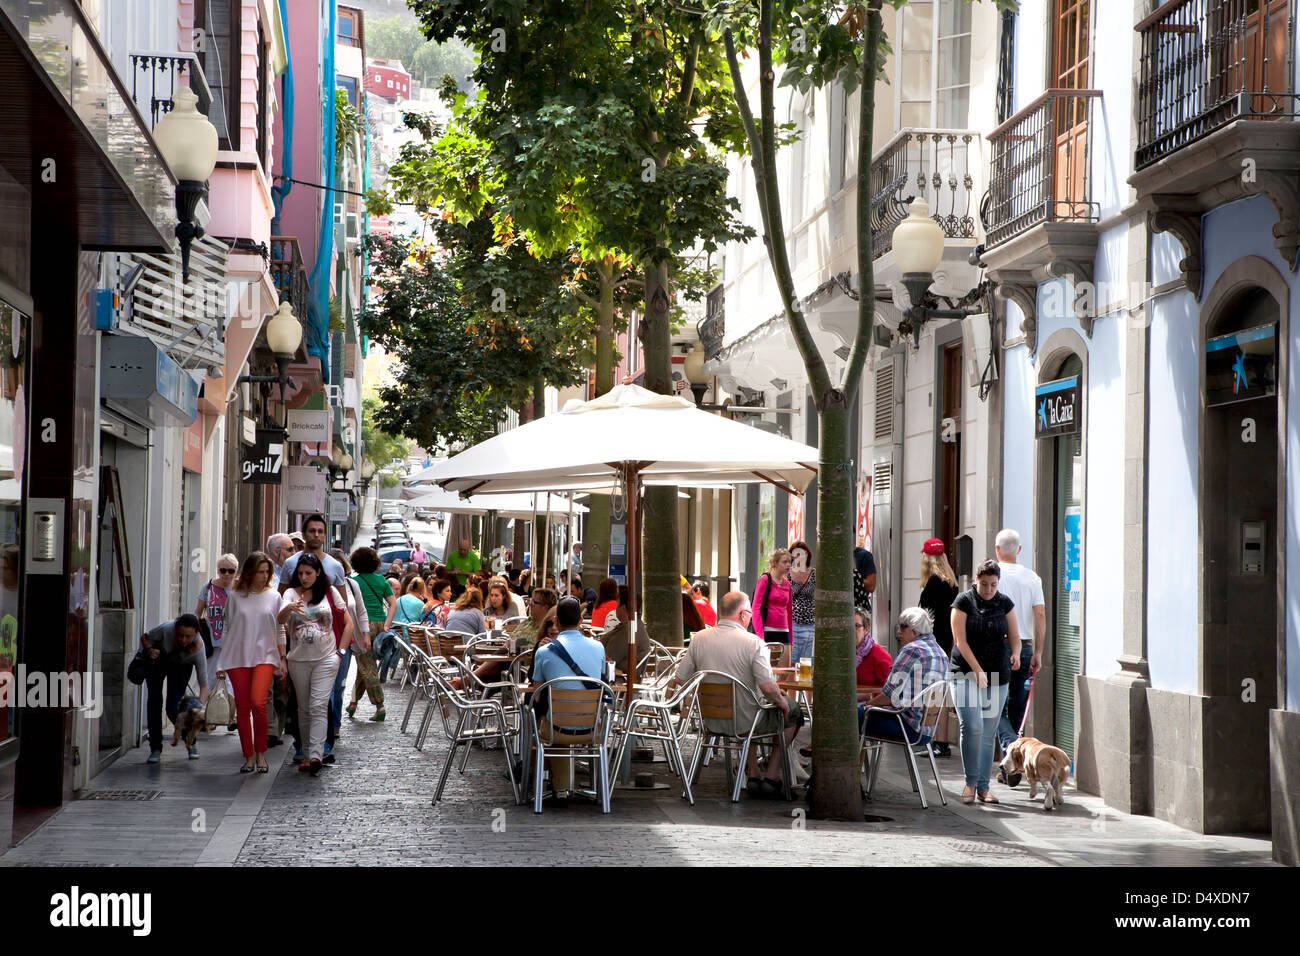 LAS PALMAS CAPITAL OF GRAN CANARIA. A TYPICAL NARROW STREET WITH CAFES AND SEATING Stock Photo